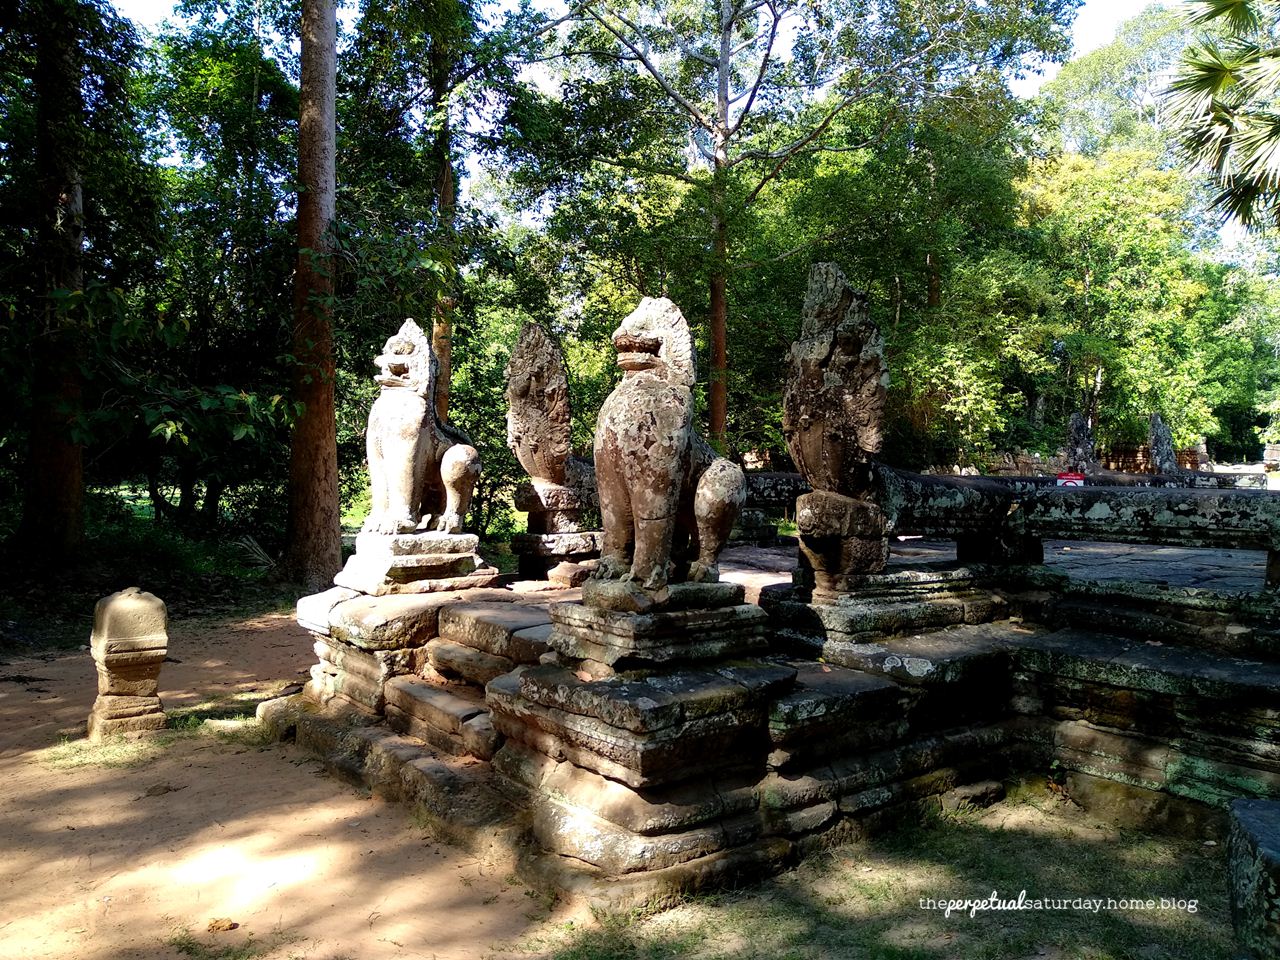 Banteay Kdei lion and naga statues, Siem Reap, Cambodia